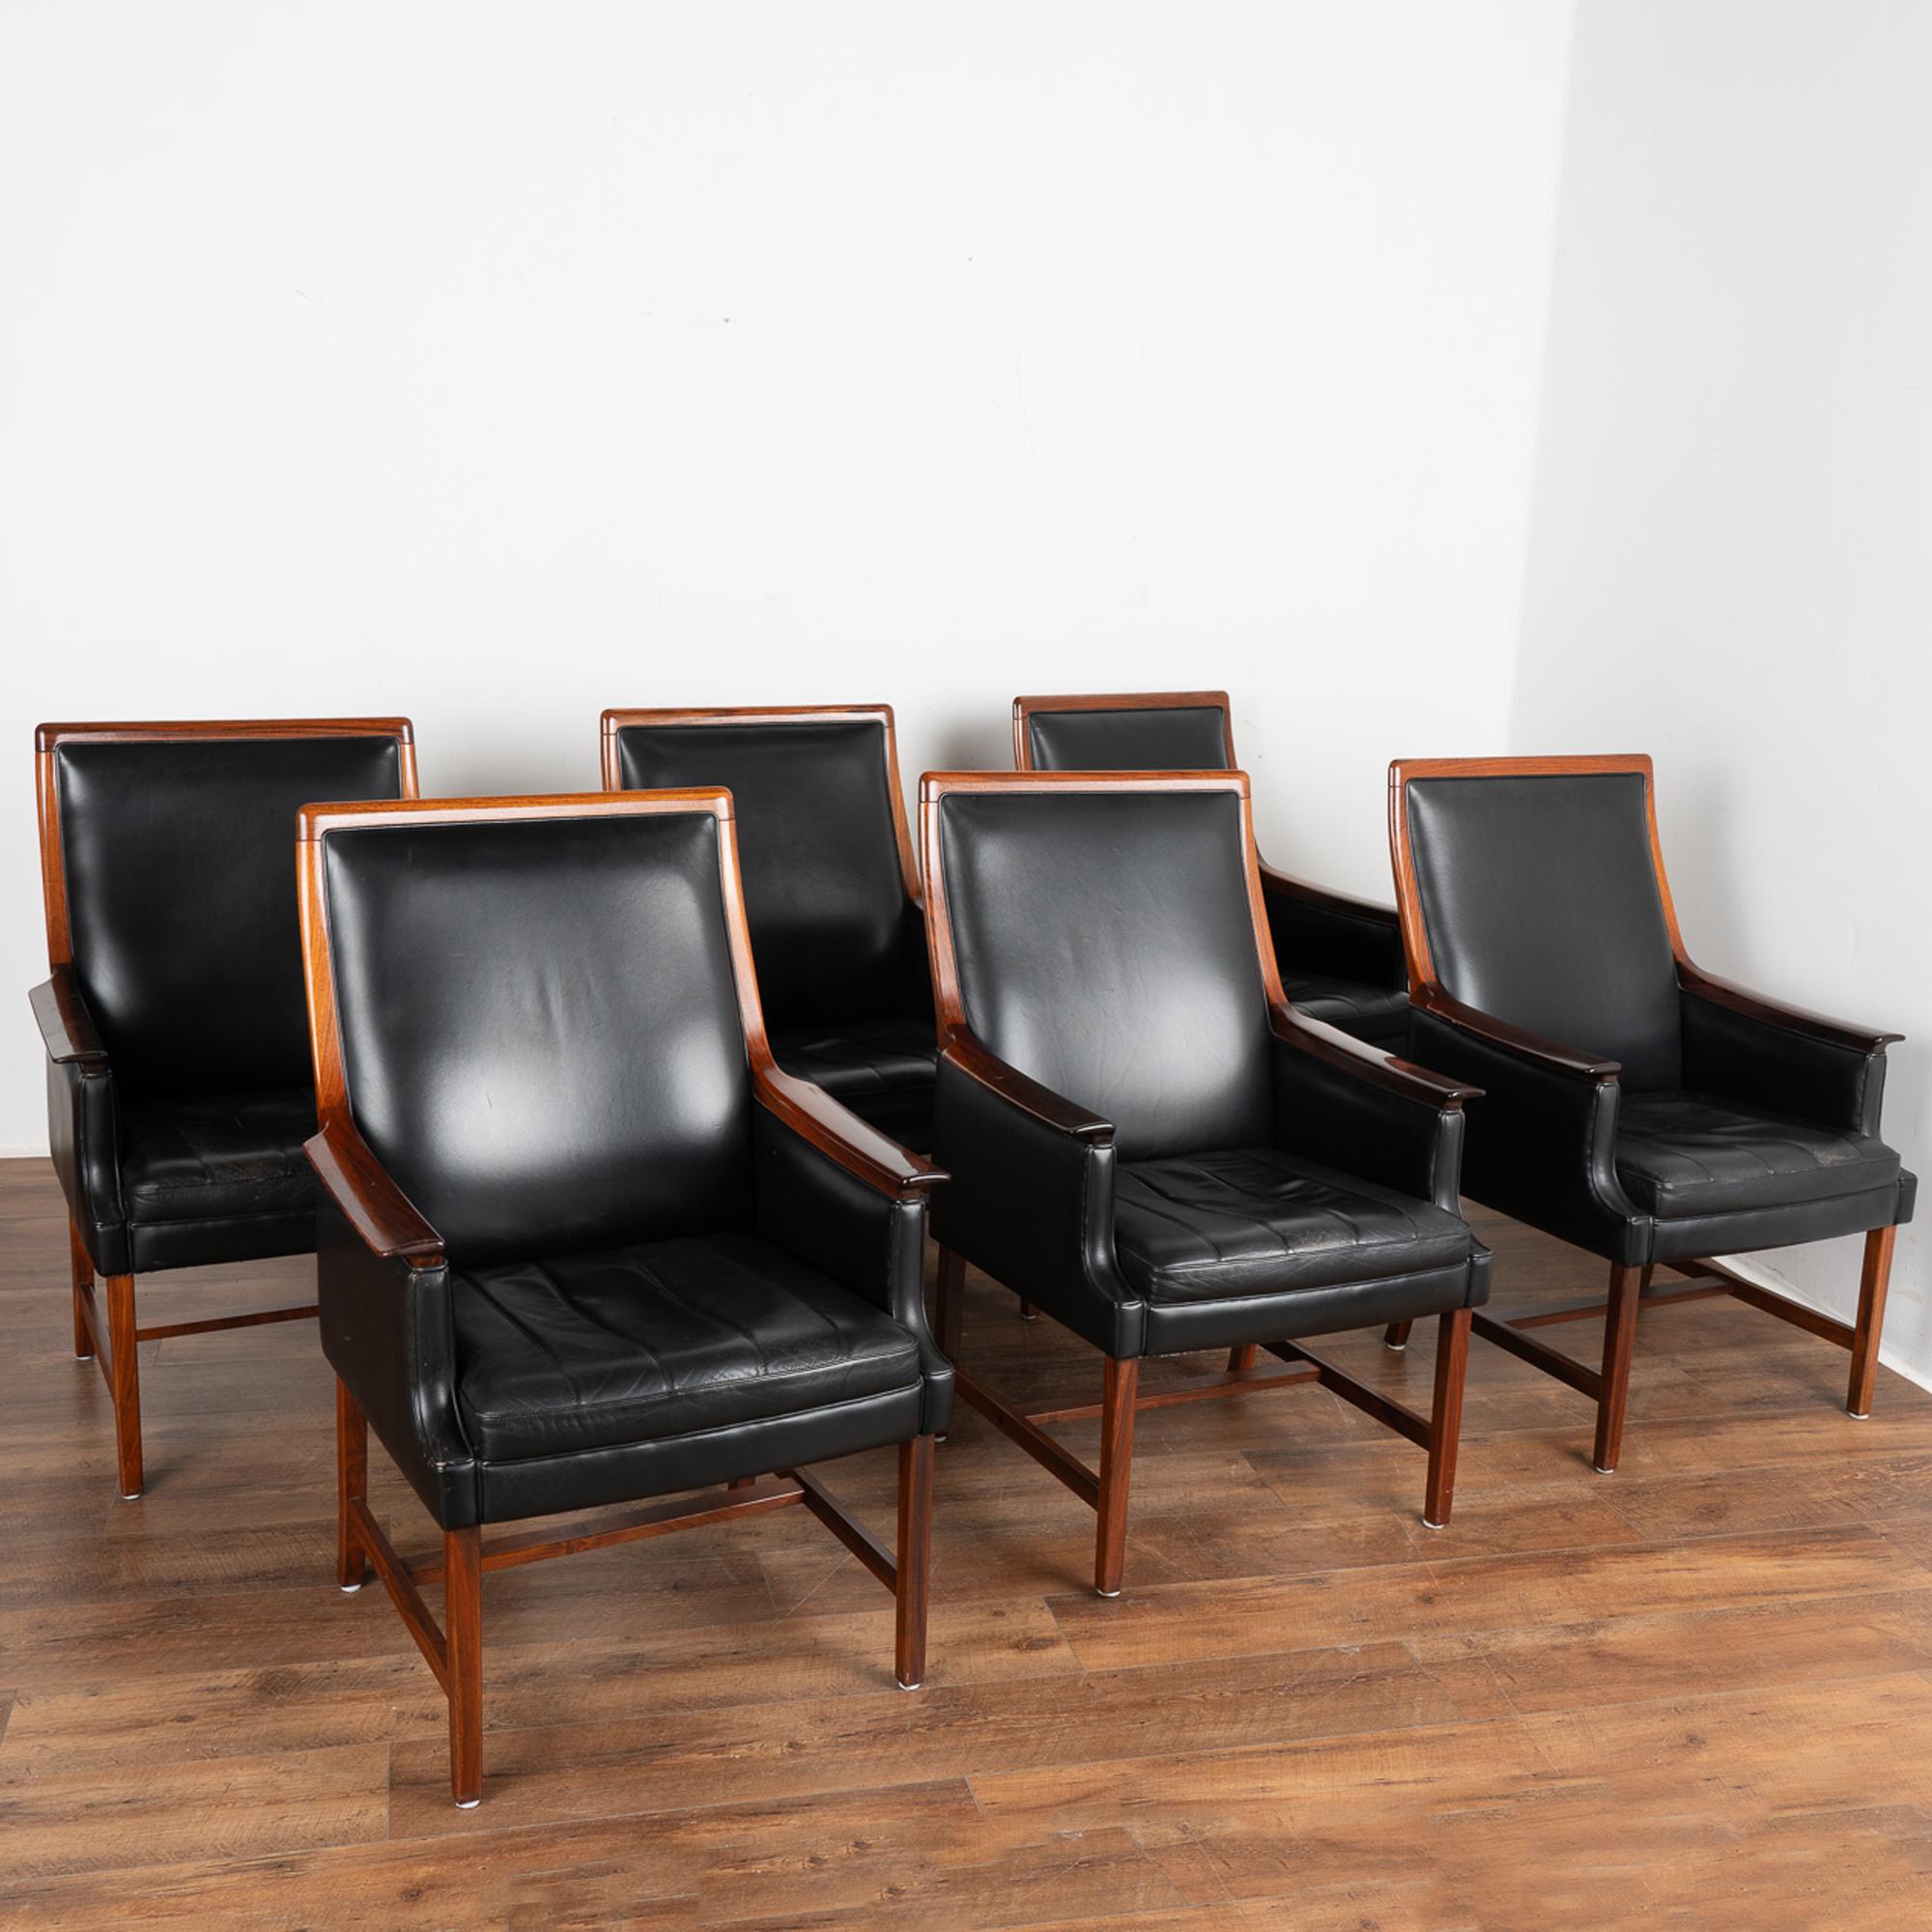 Attractive set of six mid century high-backed dining chairs/armchairs by Torbjørn Afdal.
Made of solid rosewood, seats and back upholstered in black leather. Seats (non-removable) each have four decorative seams.
Manufactured at Nesjestranda